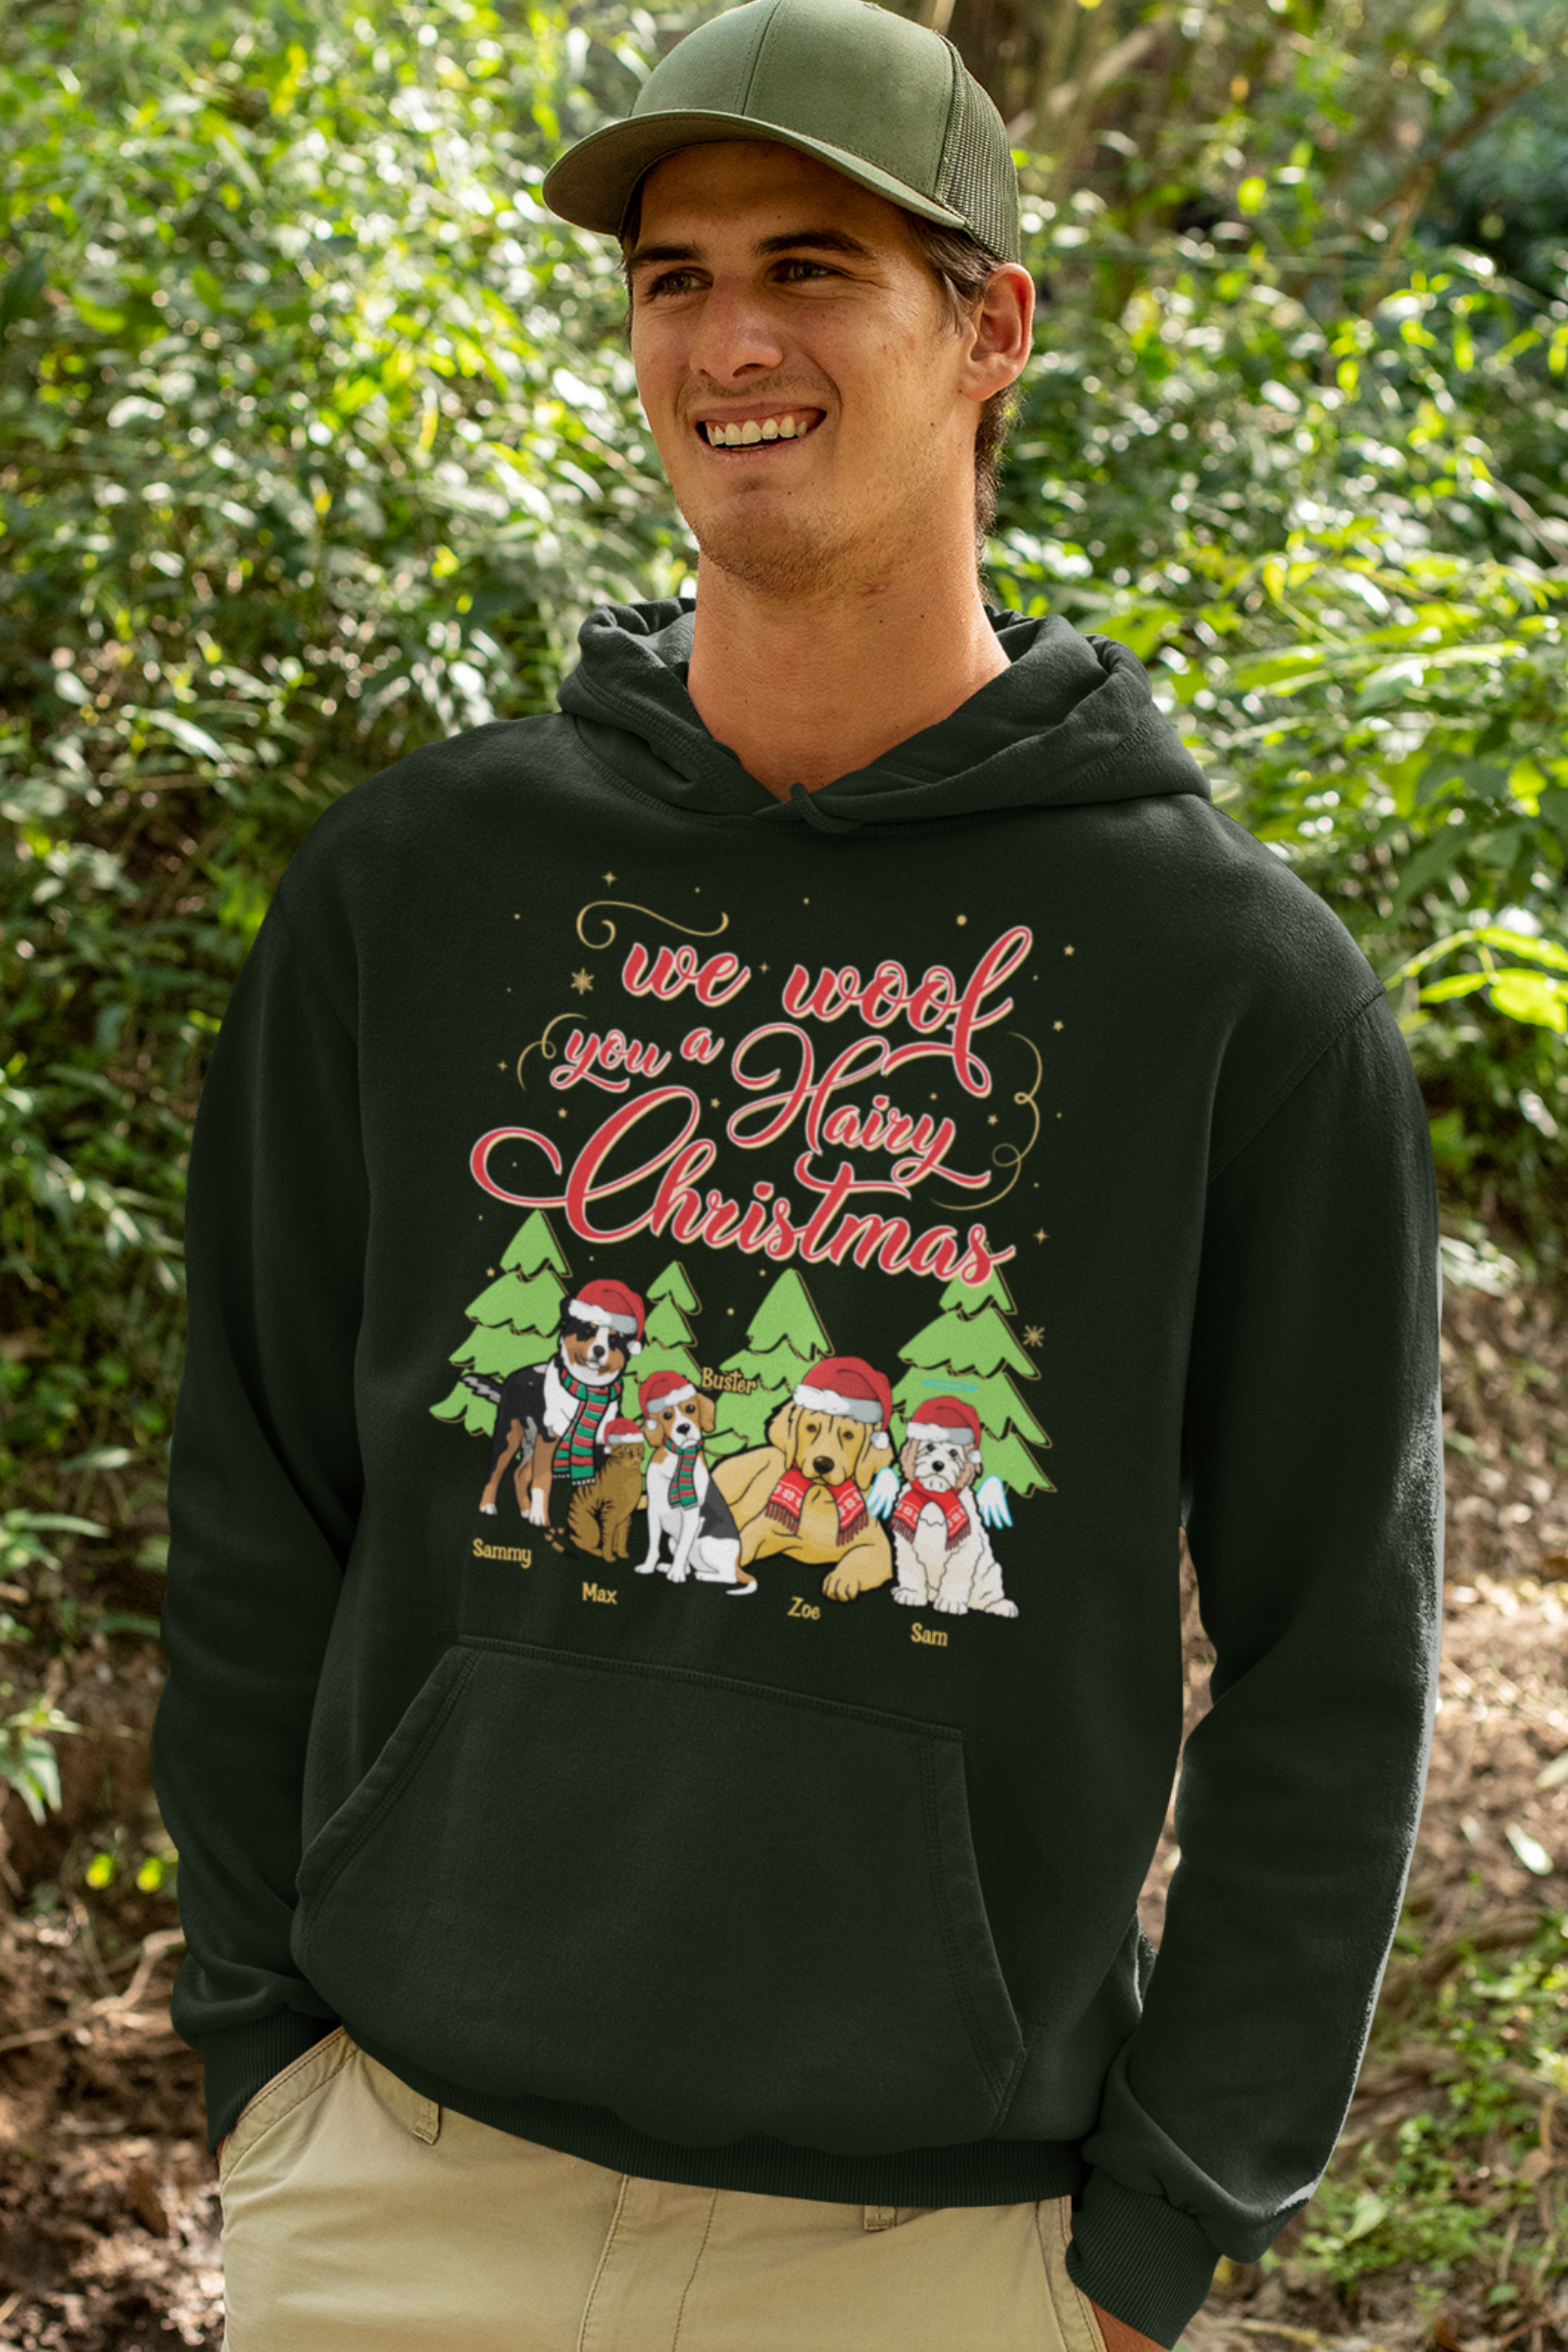 Christmas Themed Customized Hoodie & Love for Pets